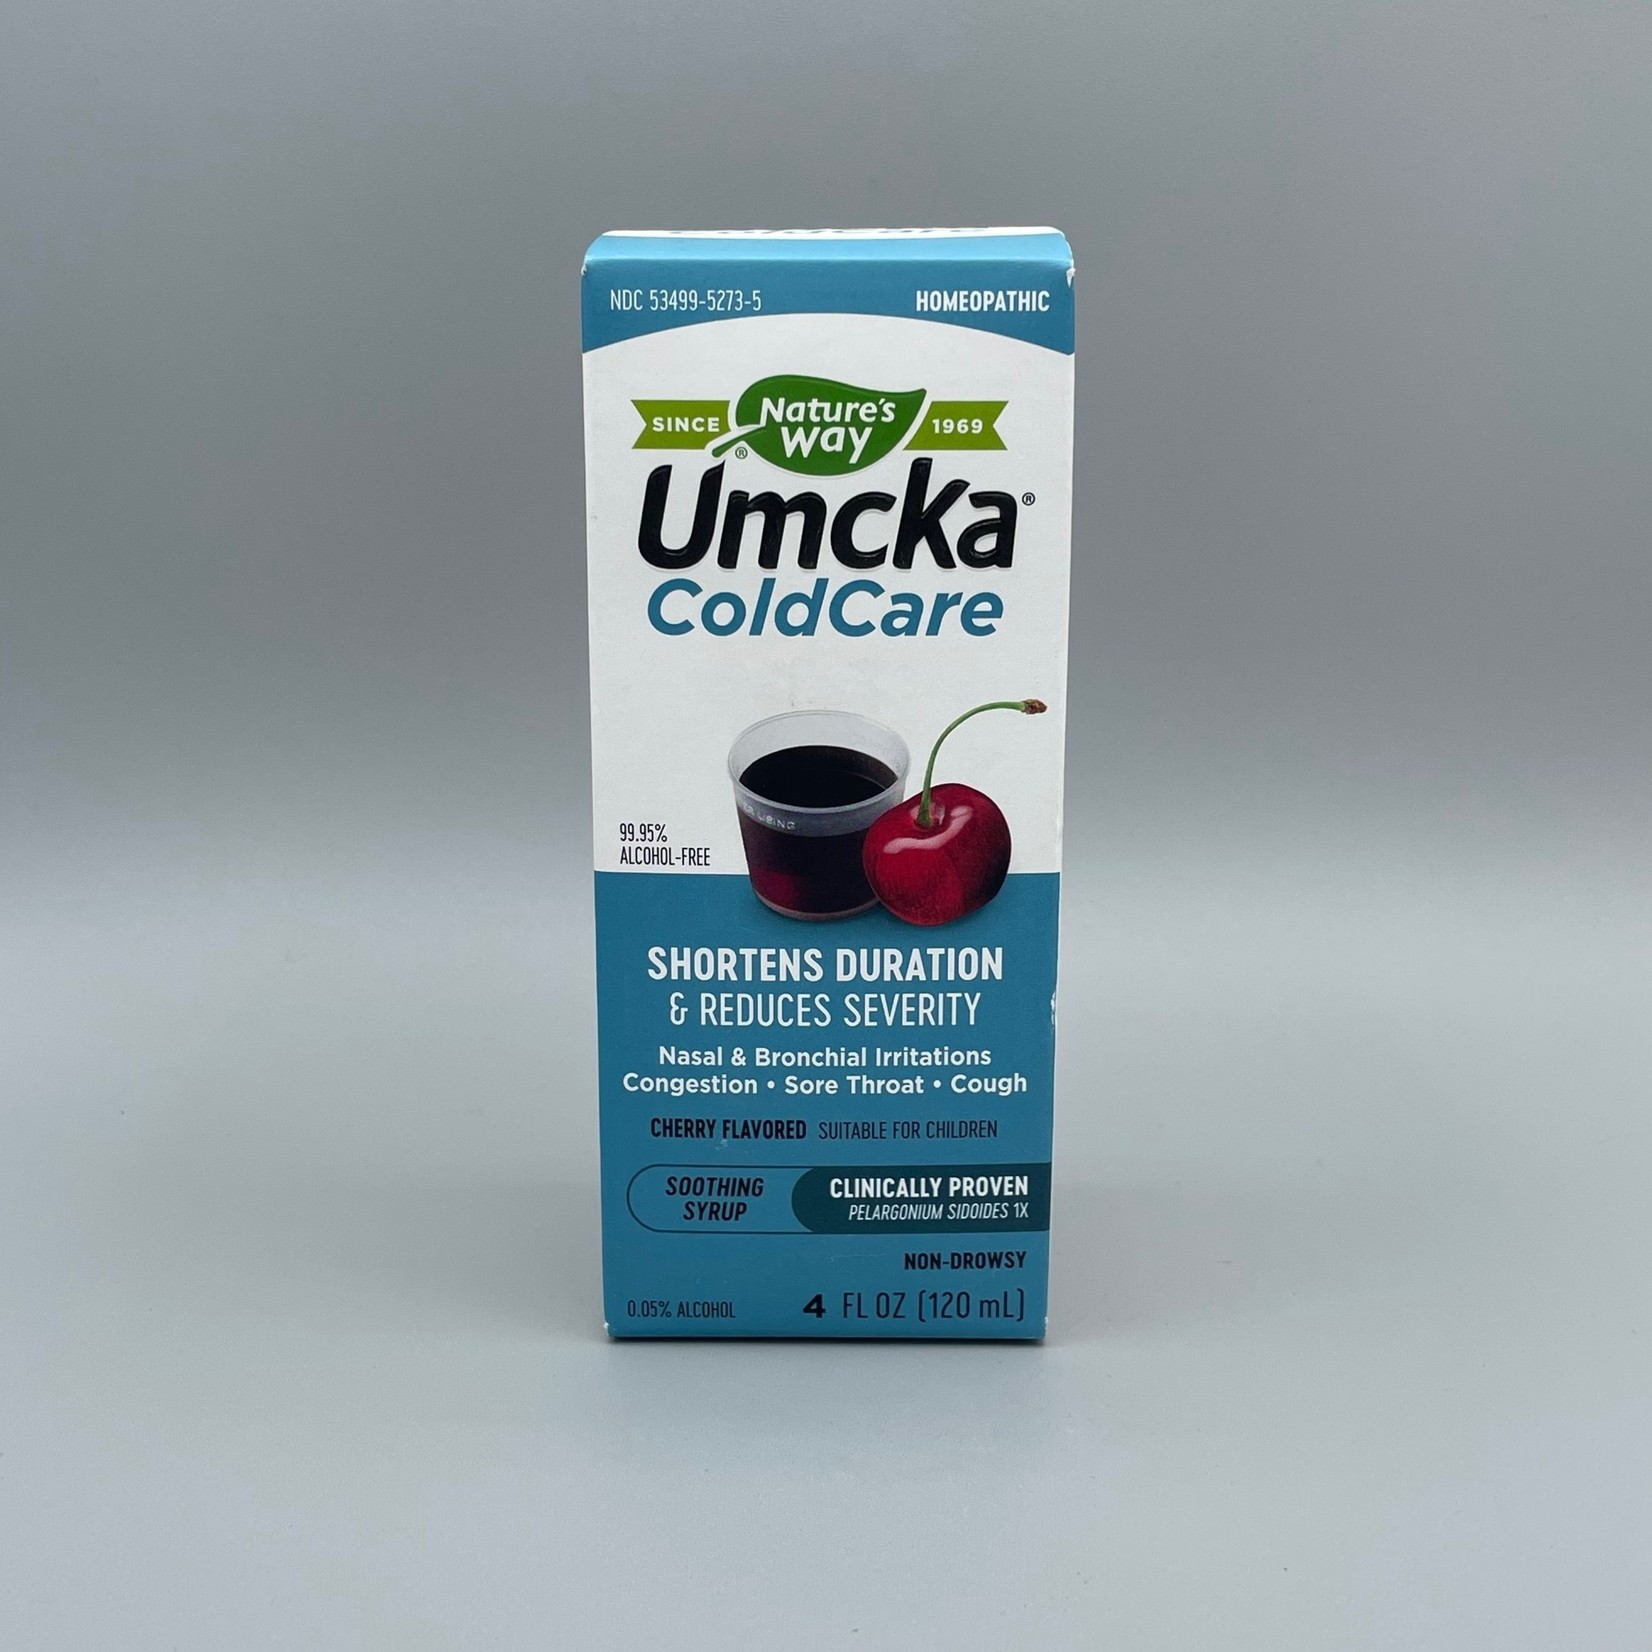 Nature‘s Way Umcka ColdCare Syrup (Non-Drowsy, Cherry Flavored), 4 fl oz